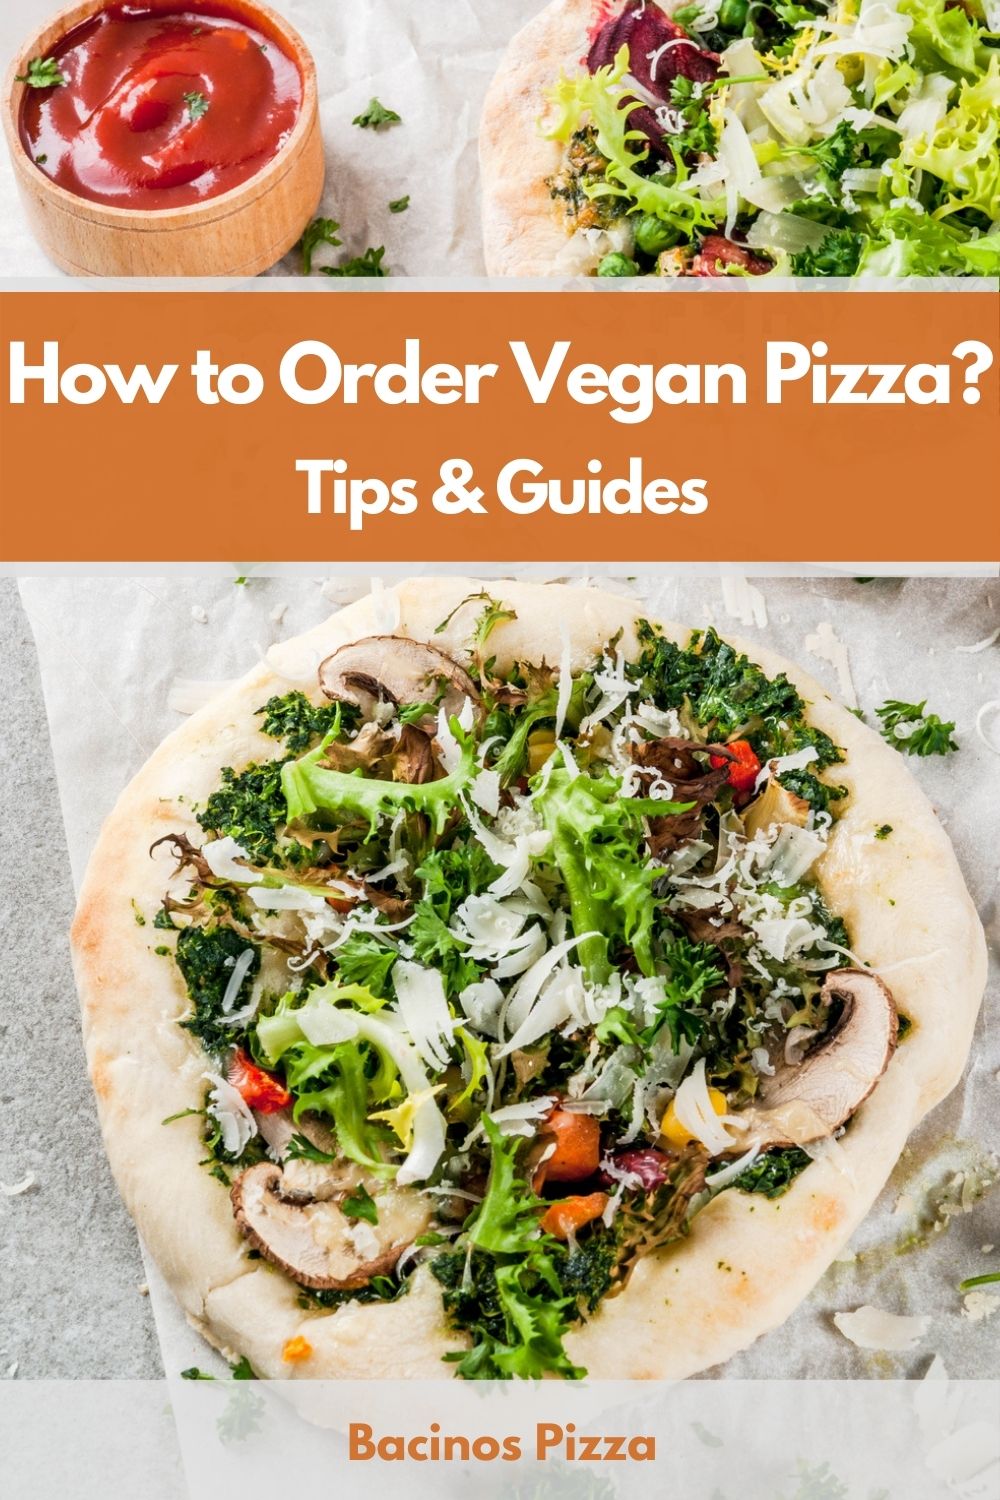 How to Order Vegan Pizza pin 2